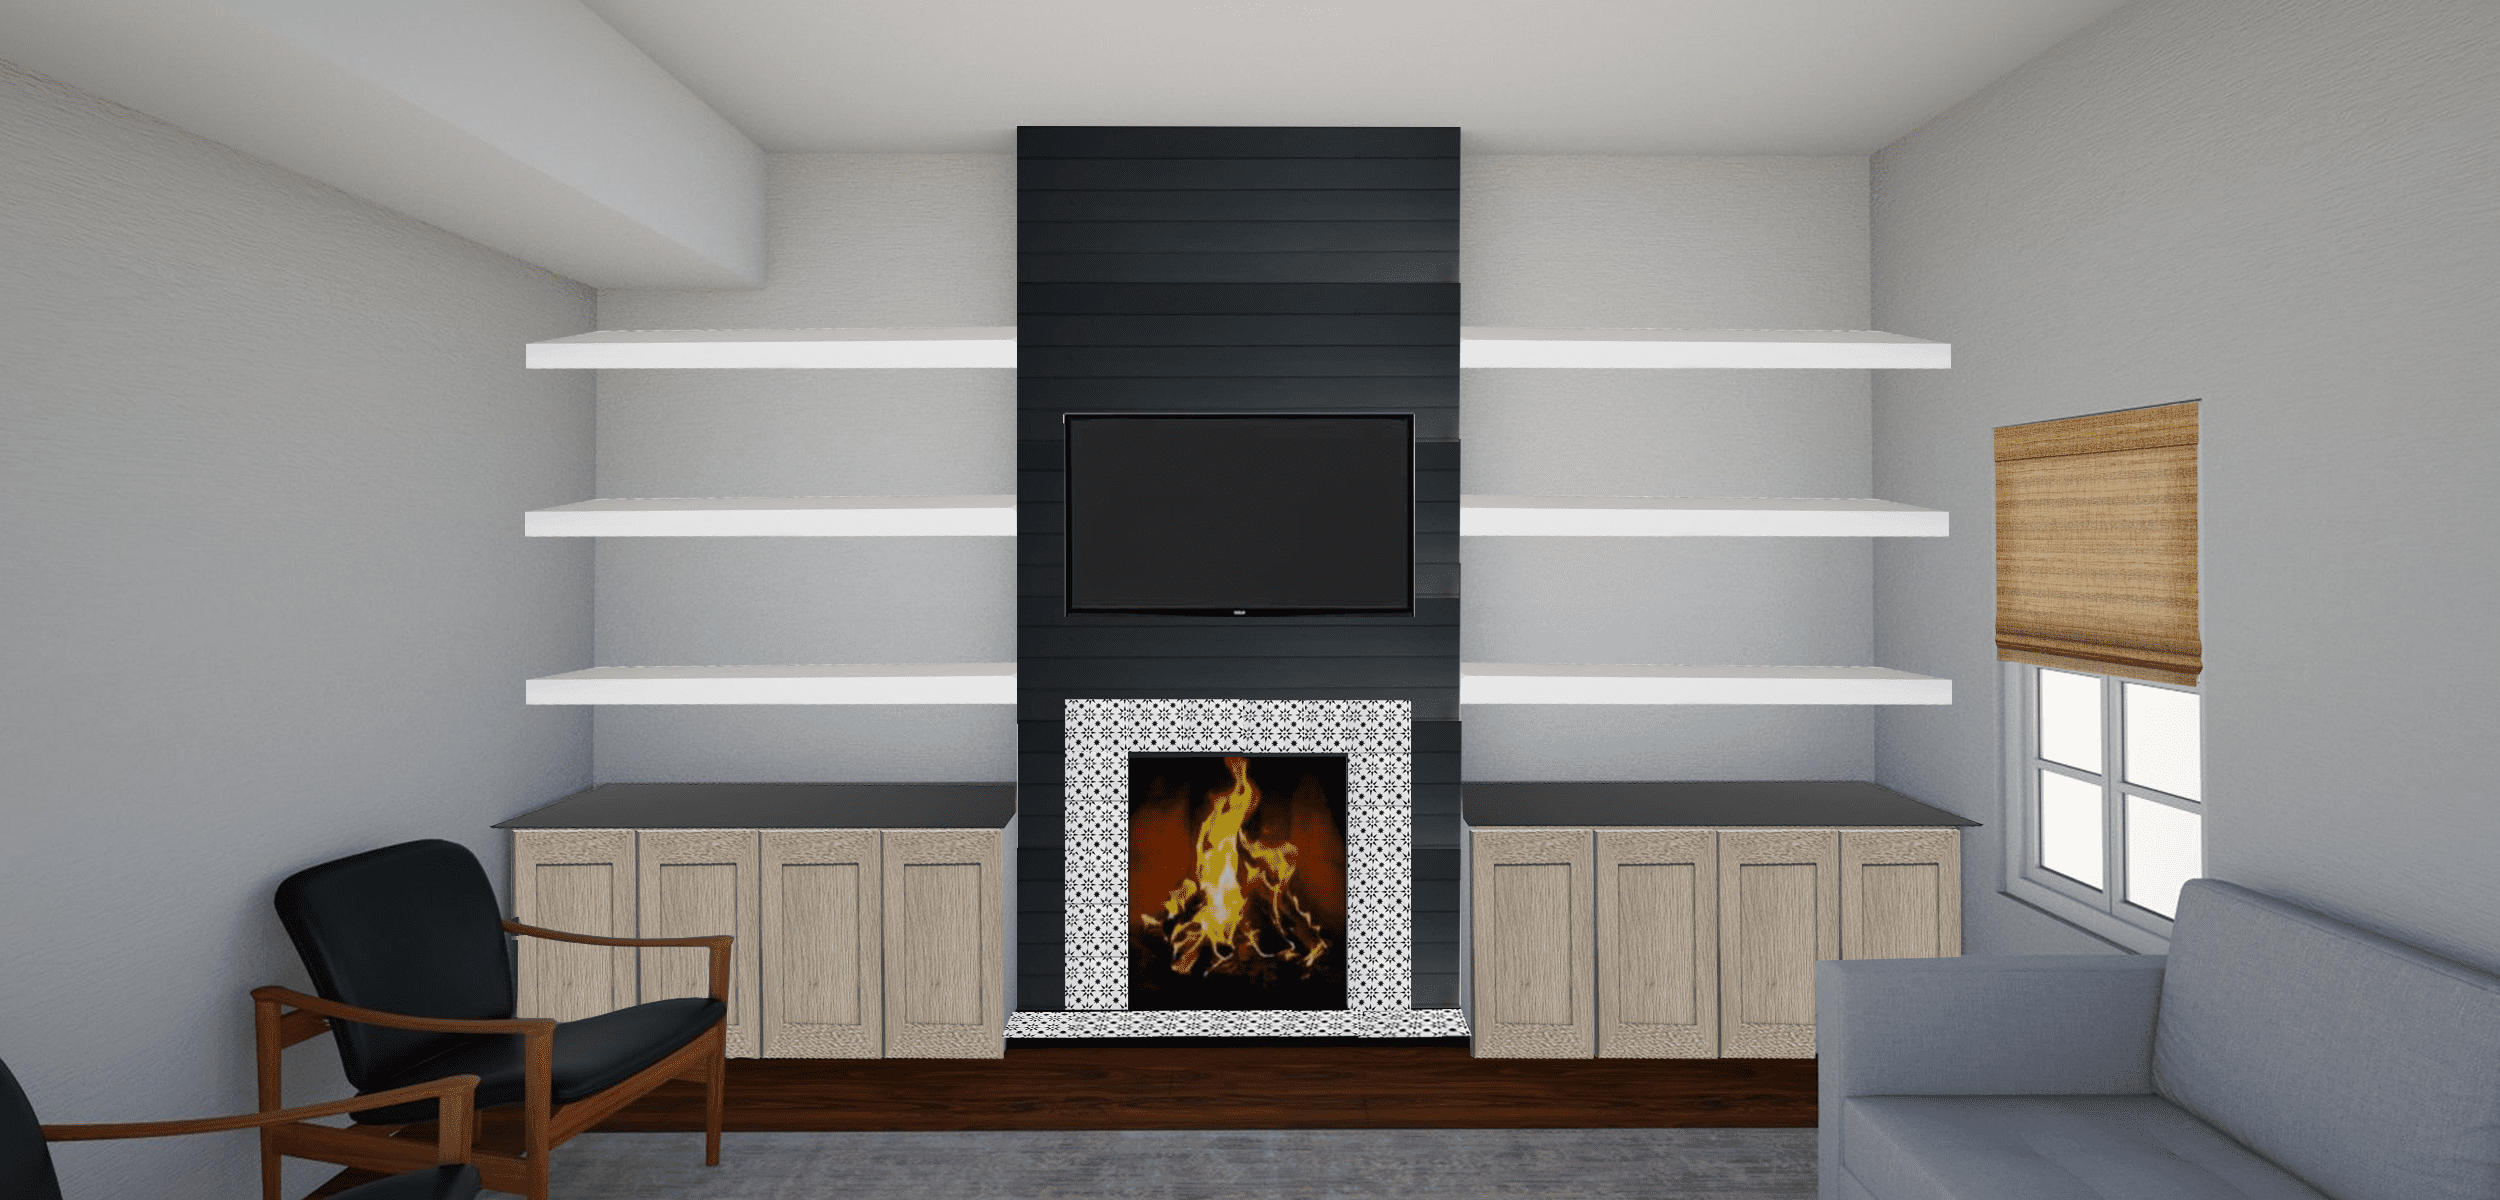 Fireplace Design Options for our Living Room Makeover